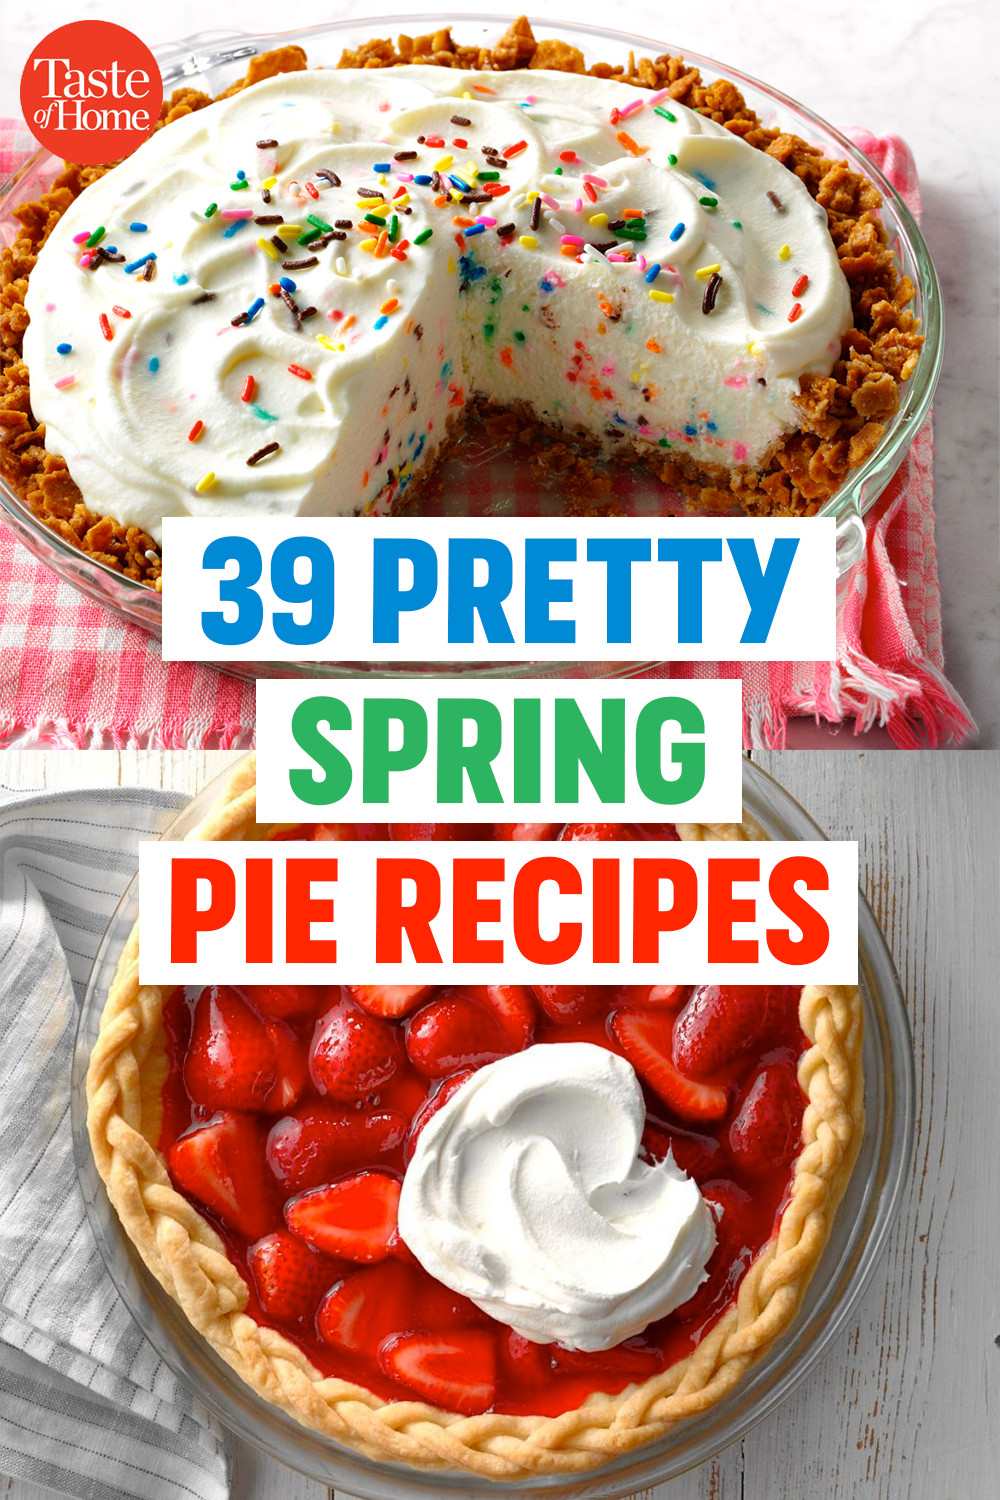 Spring Pie Recipes
 42 Gorgeous Pies to Make for Spring in 2020